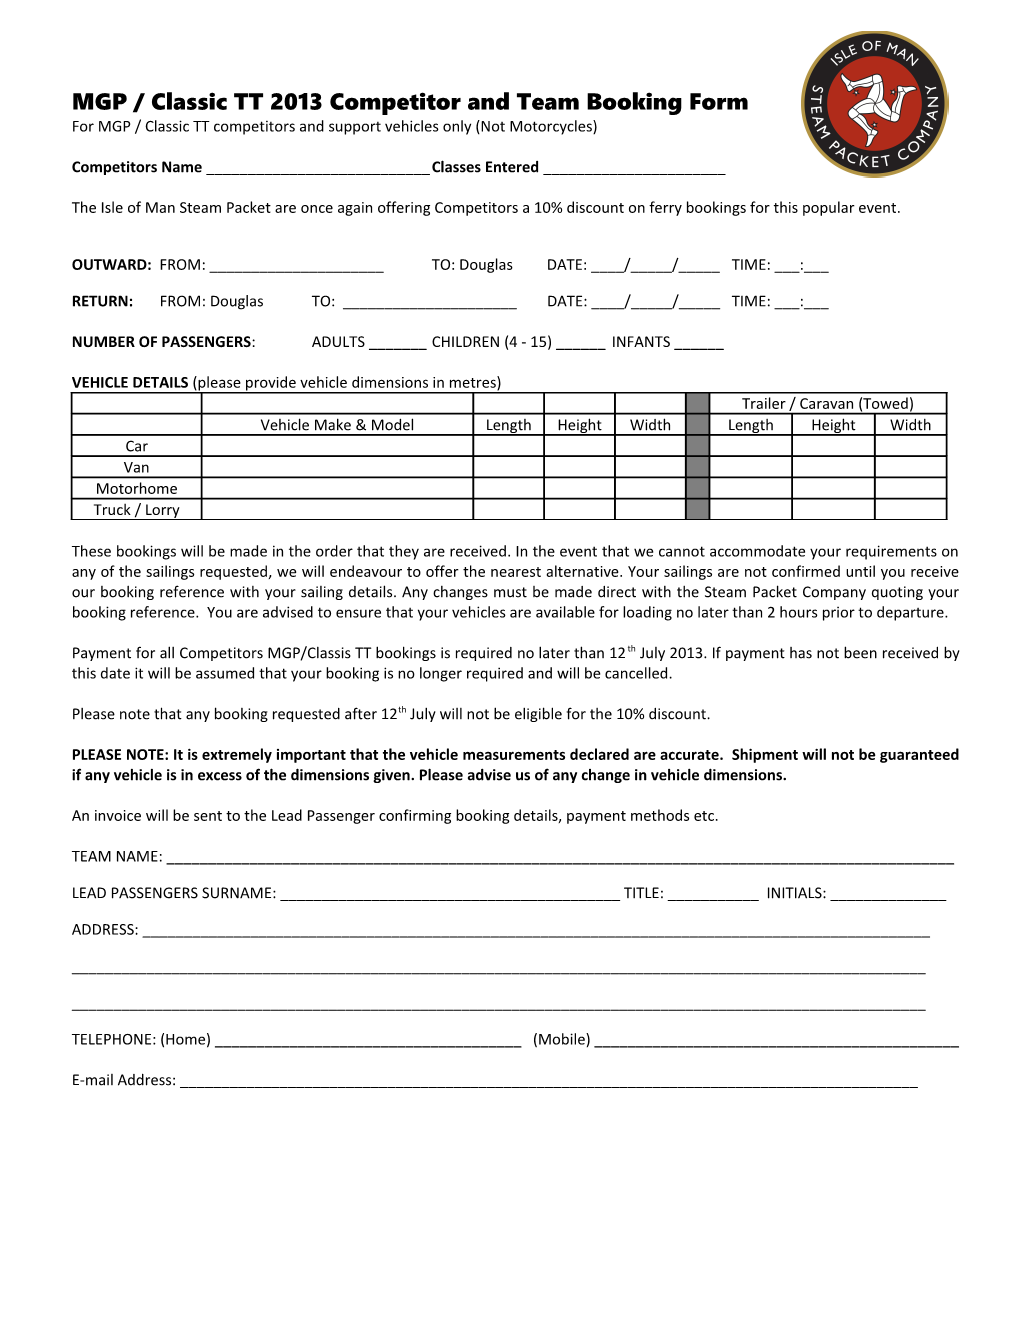 TT 2008 Competitor and Team Booking Form